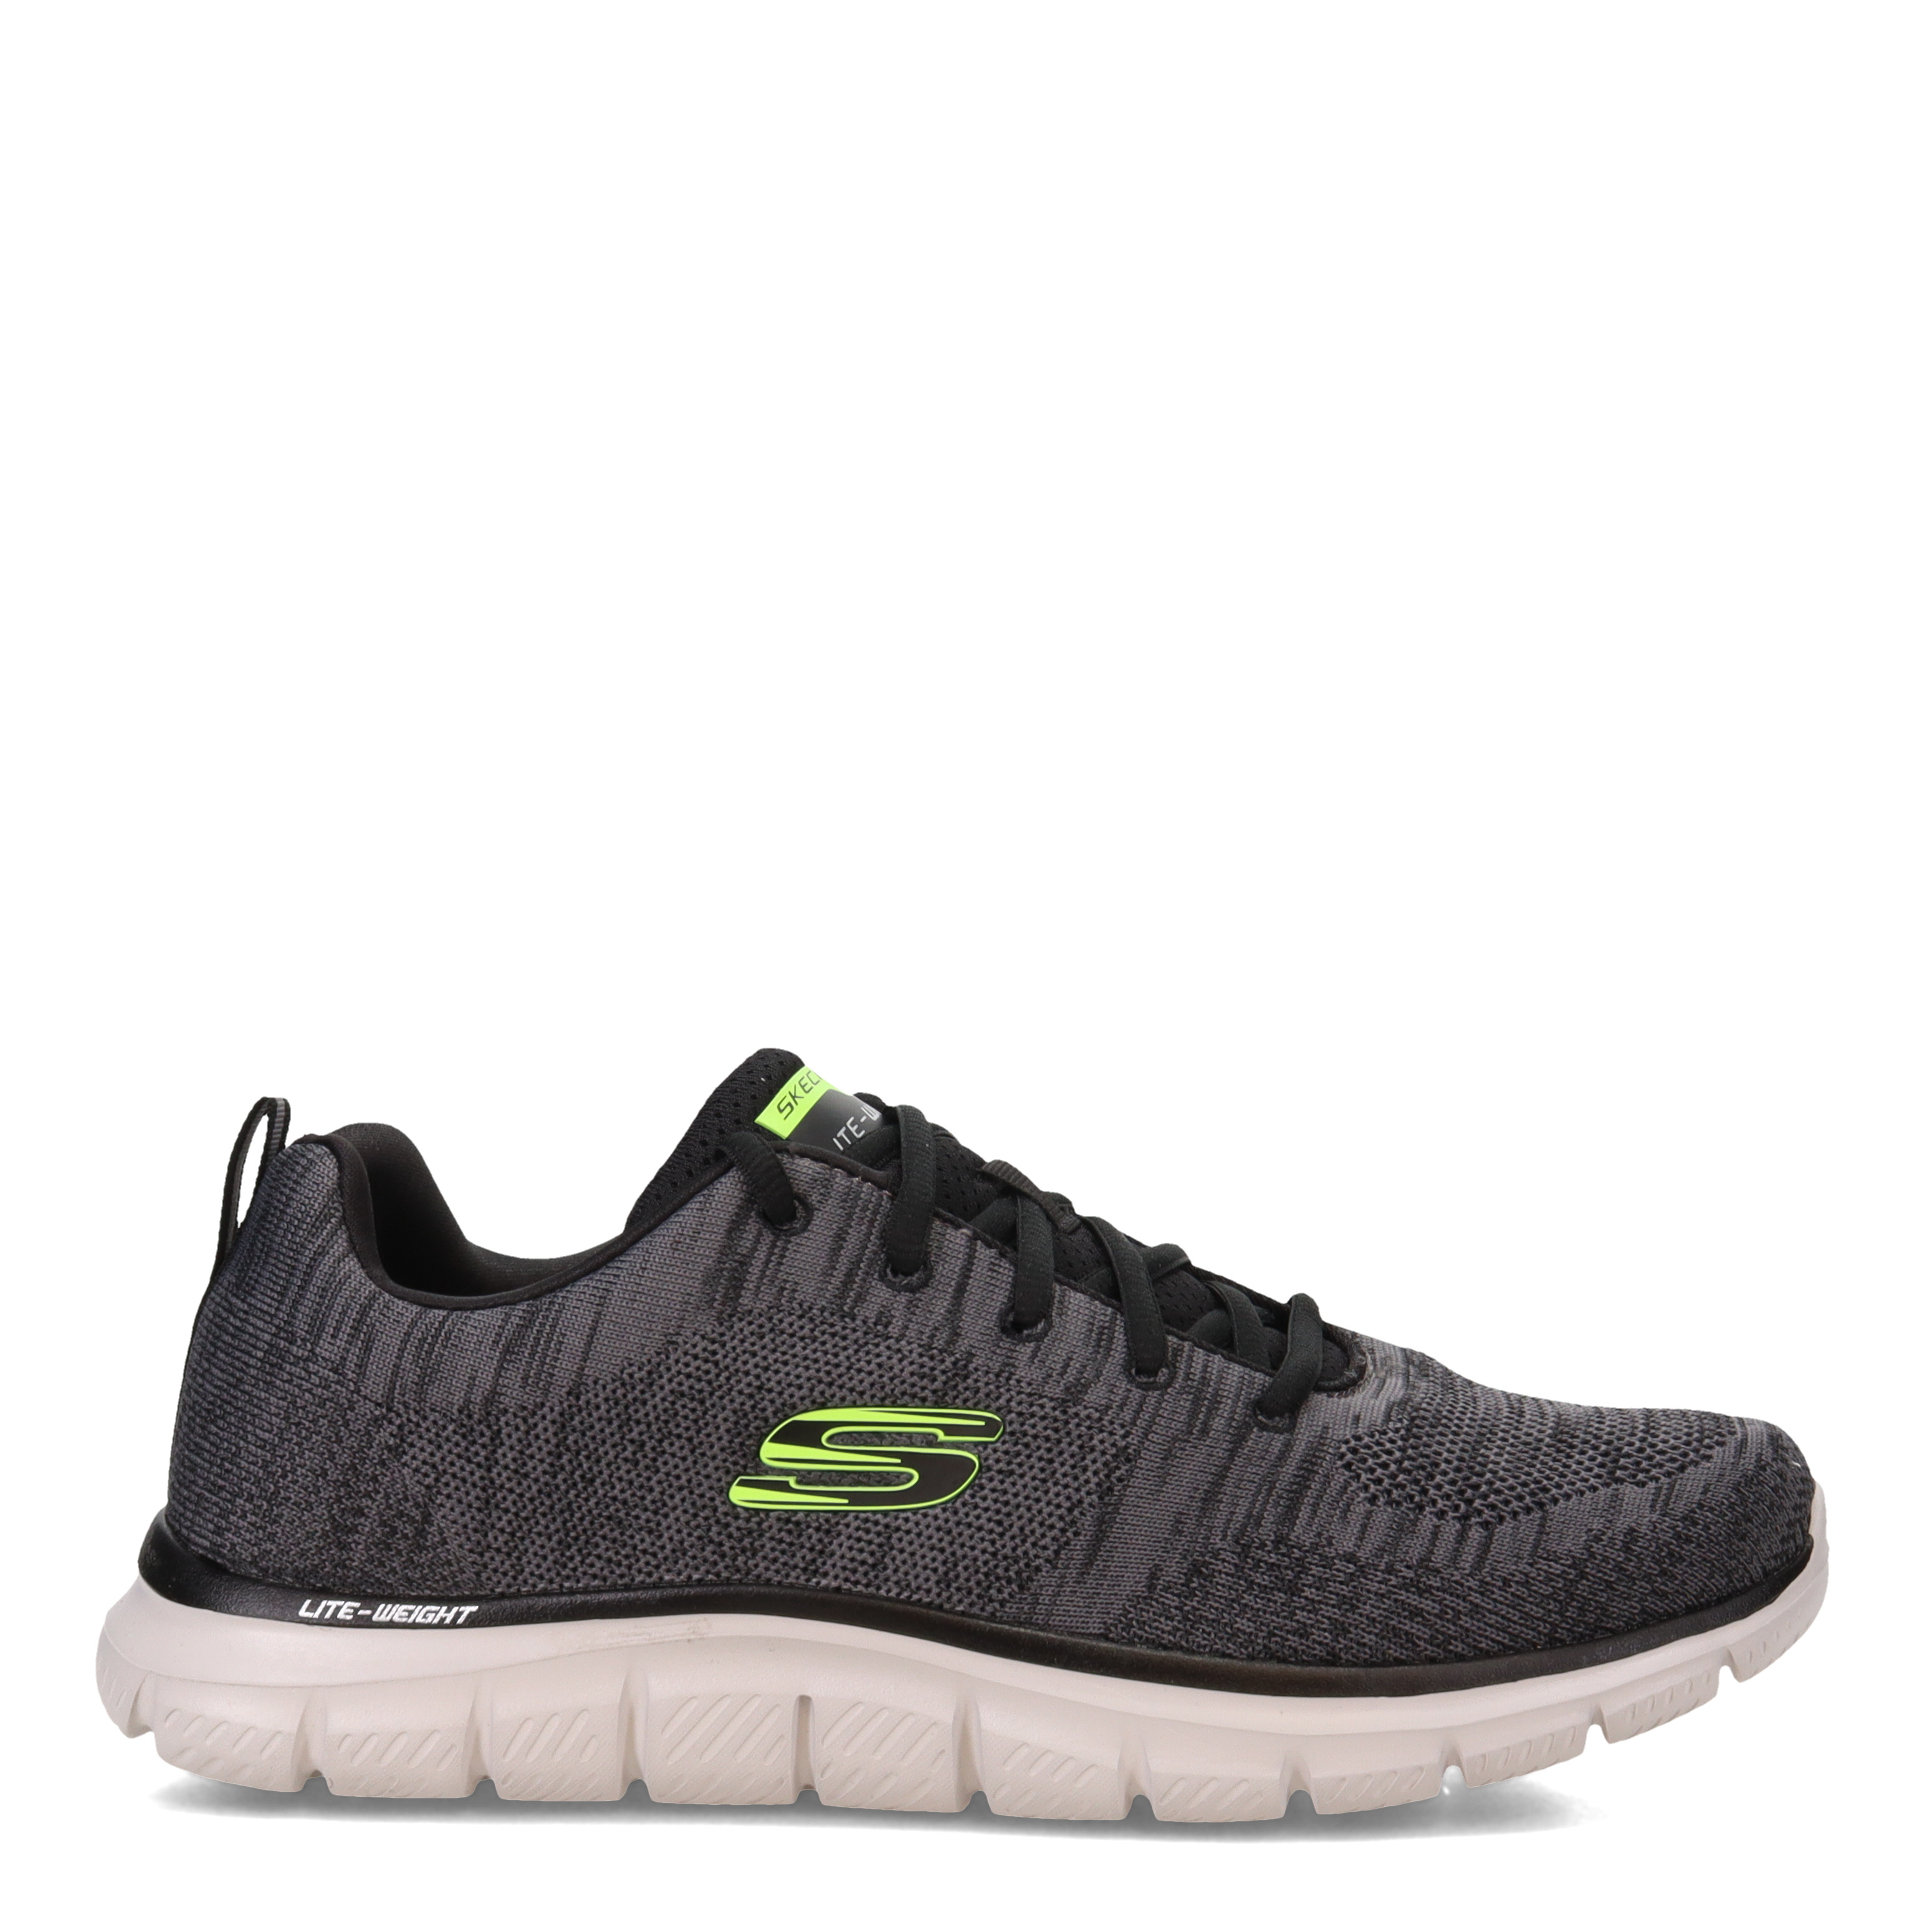 Men\'s Skechers, Track - Front Fabric-And-Syn | Runner Sneaker Charcoal 232298-CCBK eBay